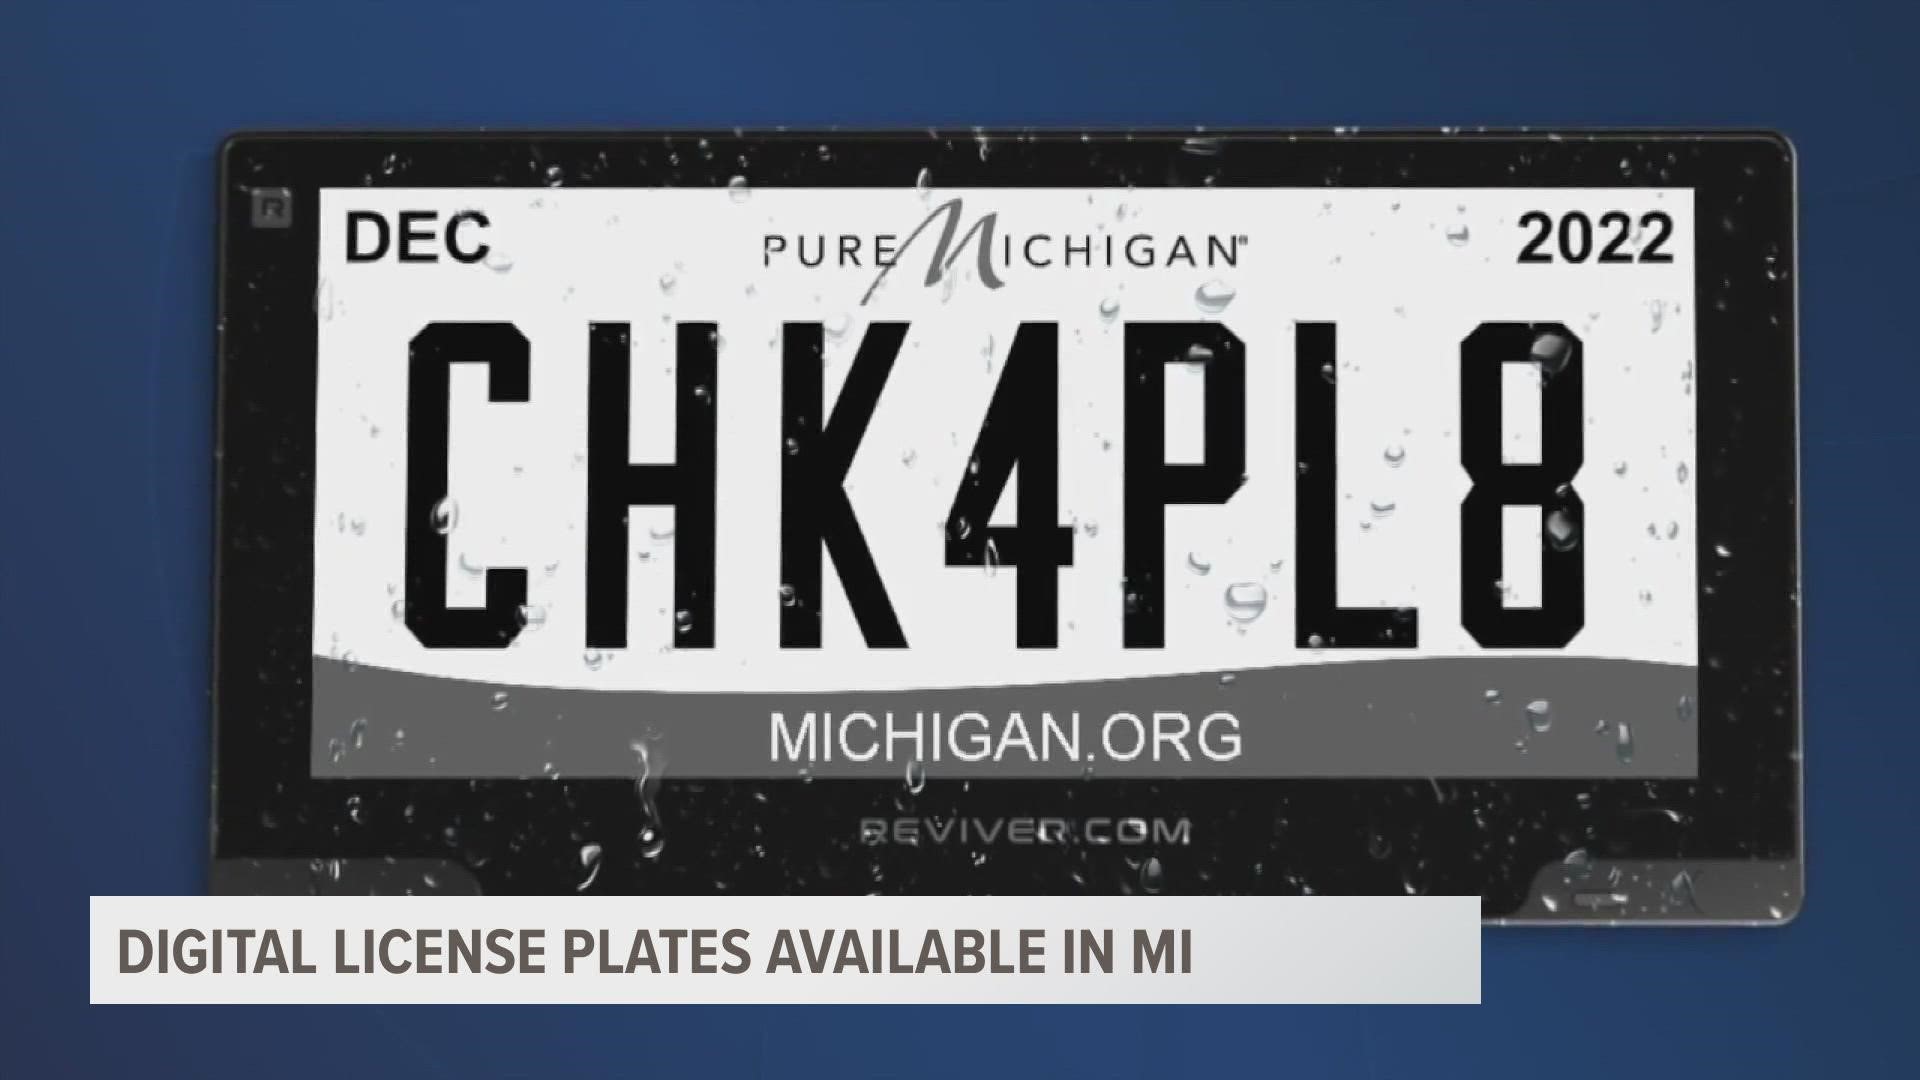 Digital license plates are aiming to make renewing vehicle registrations easier and can send an alert if the car is being stolen.